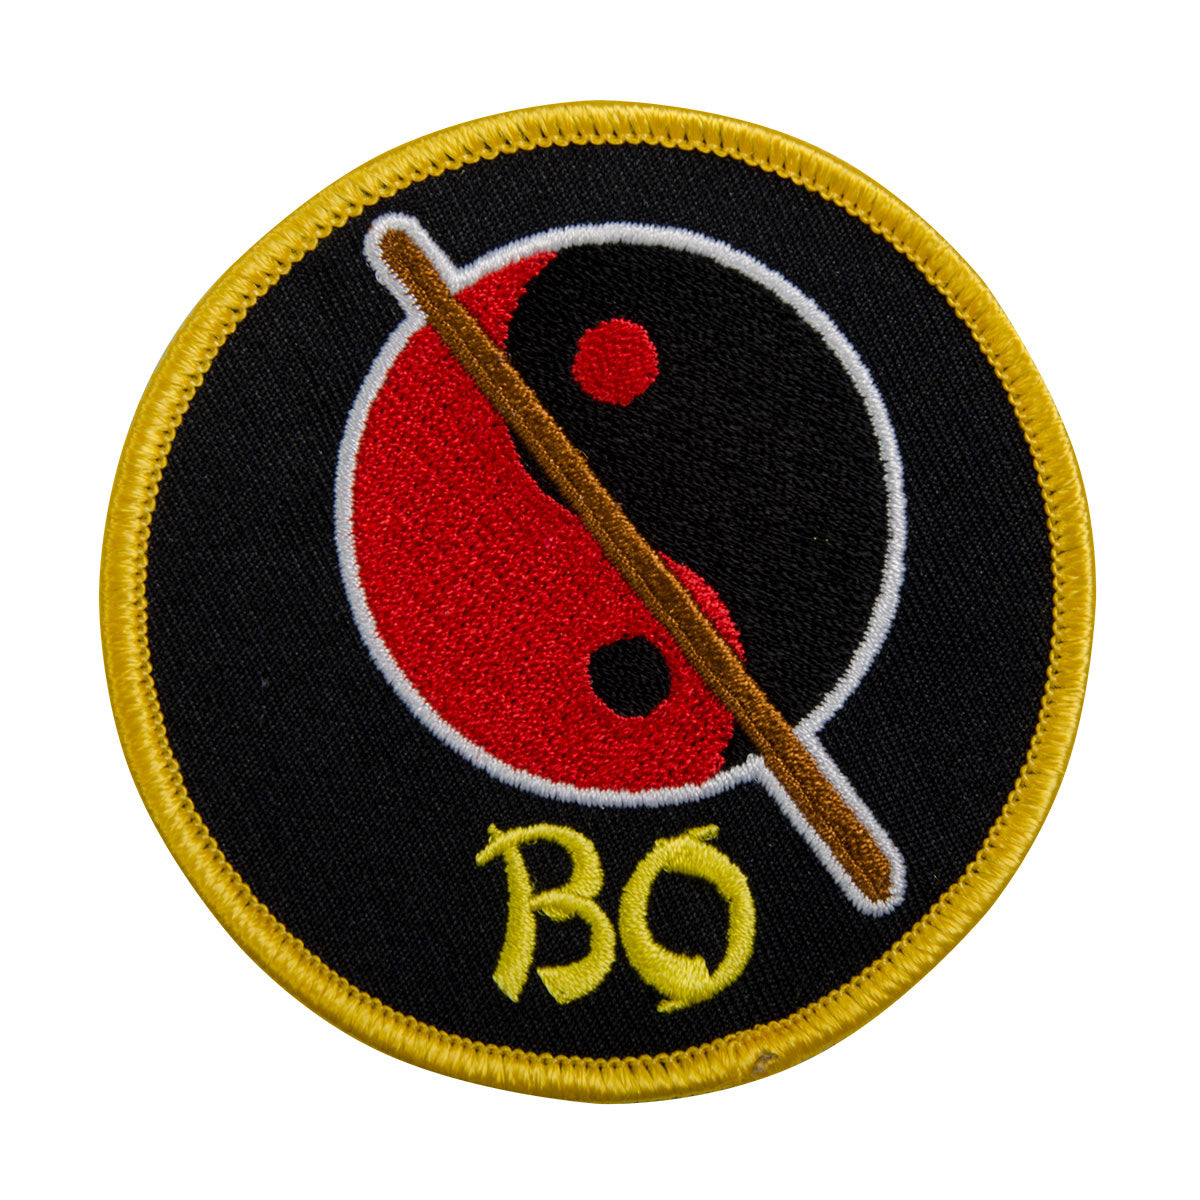 Weapons Patch - Bo Staff